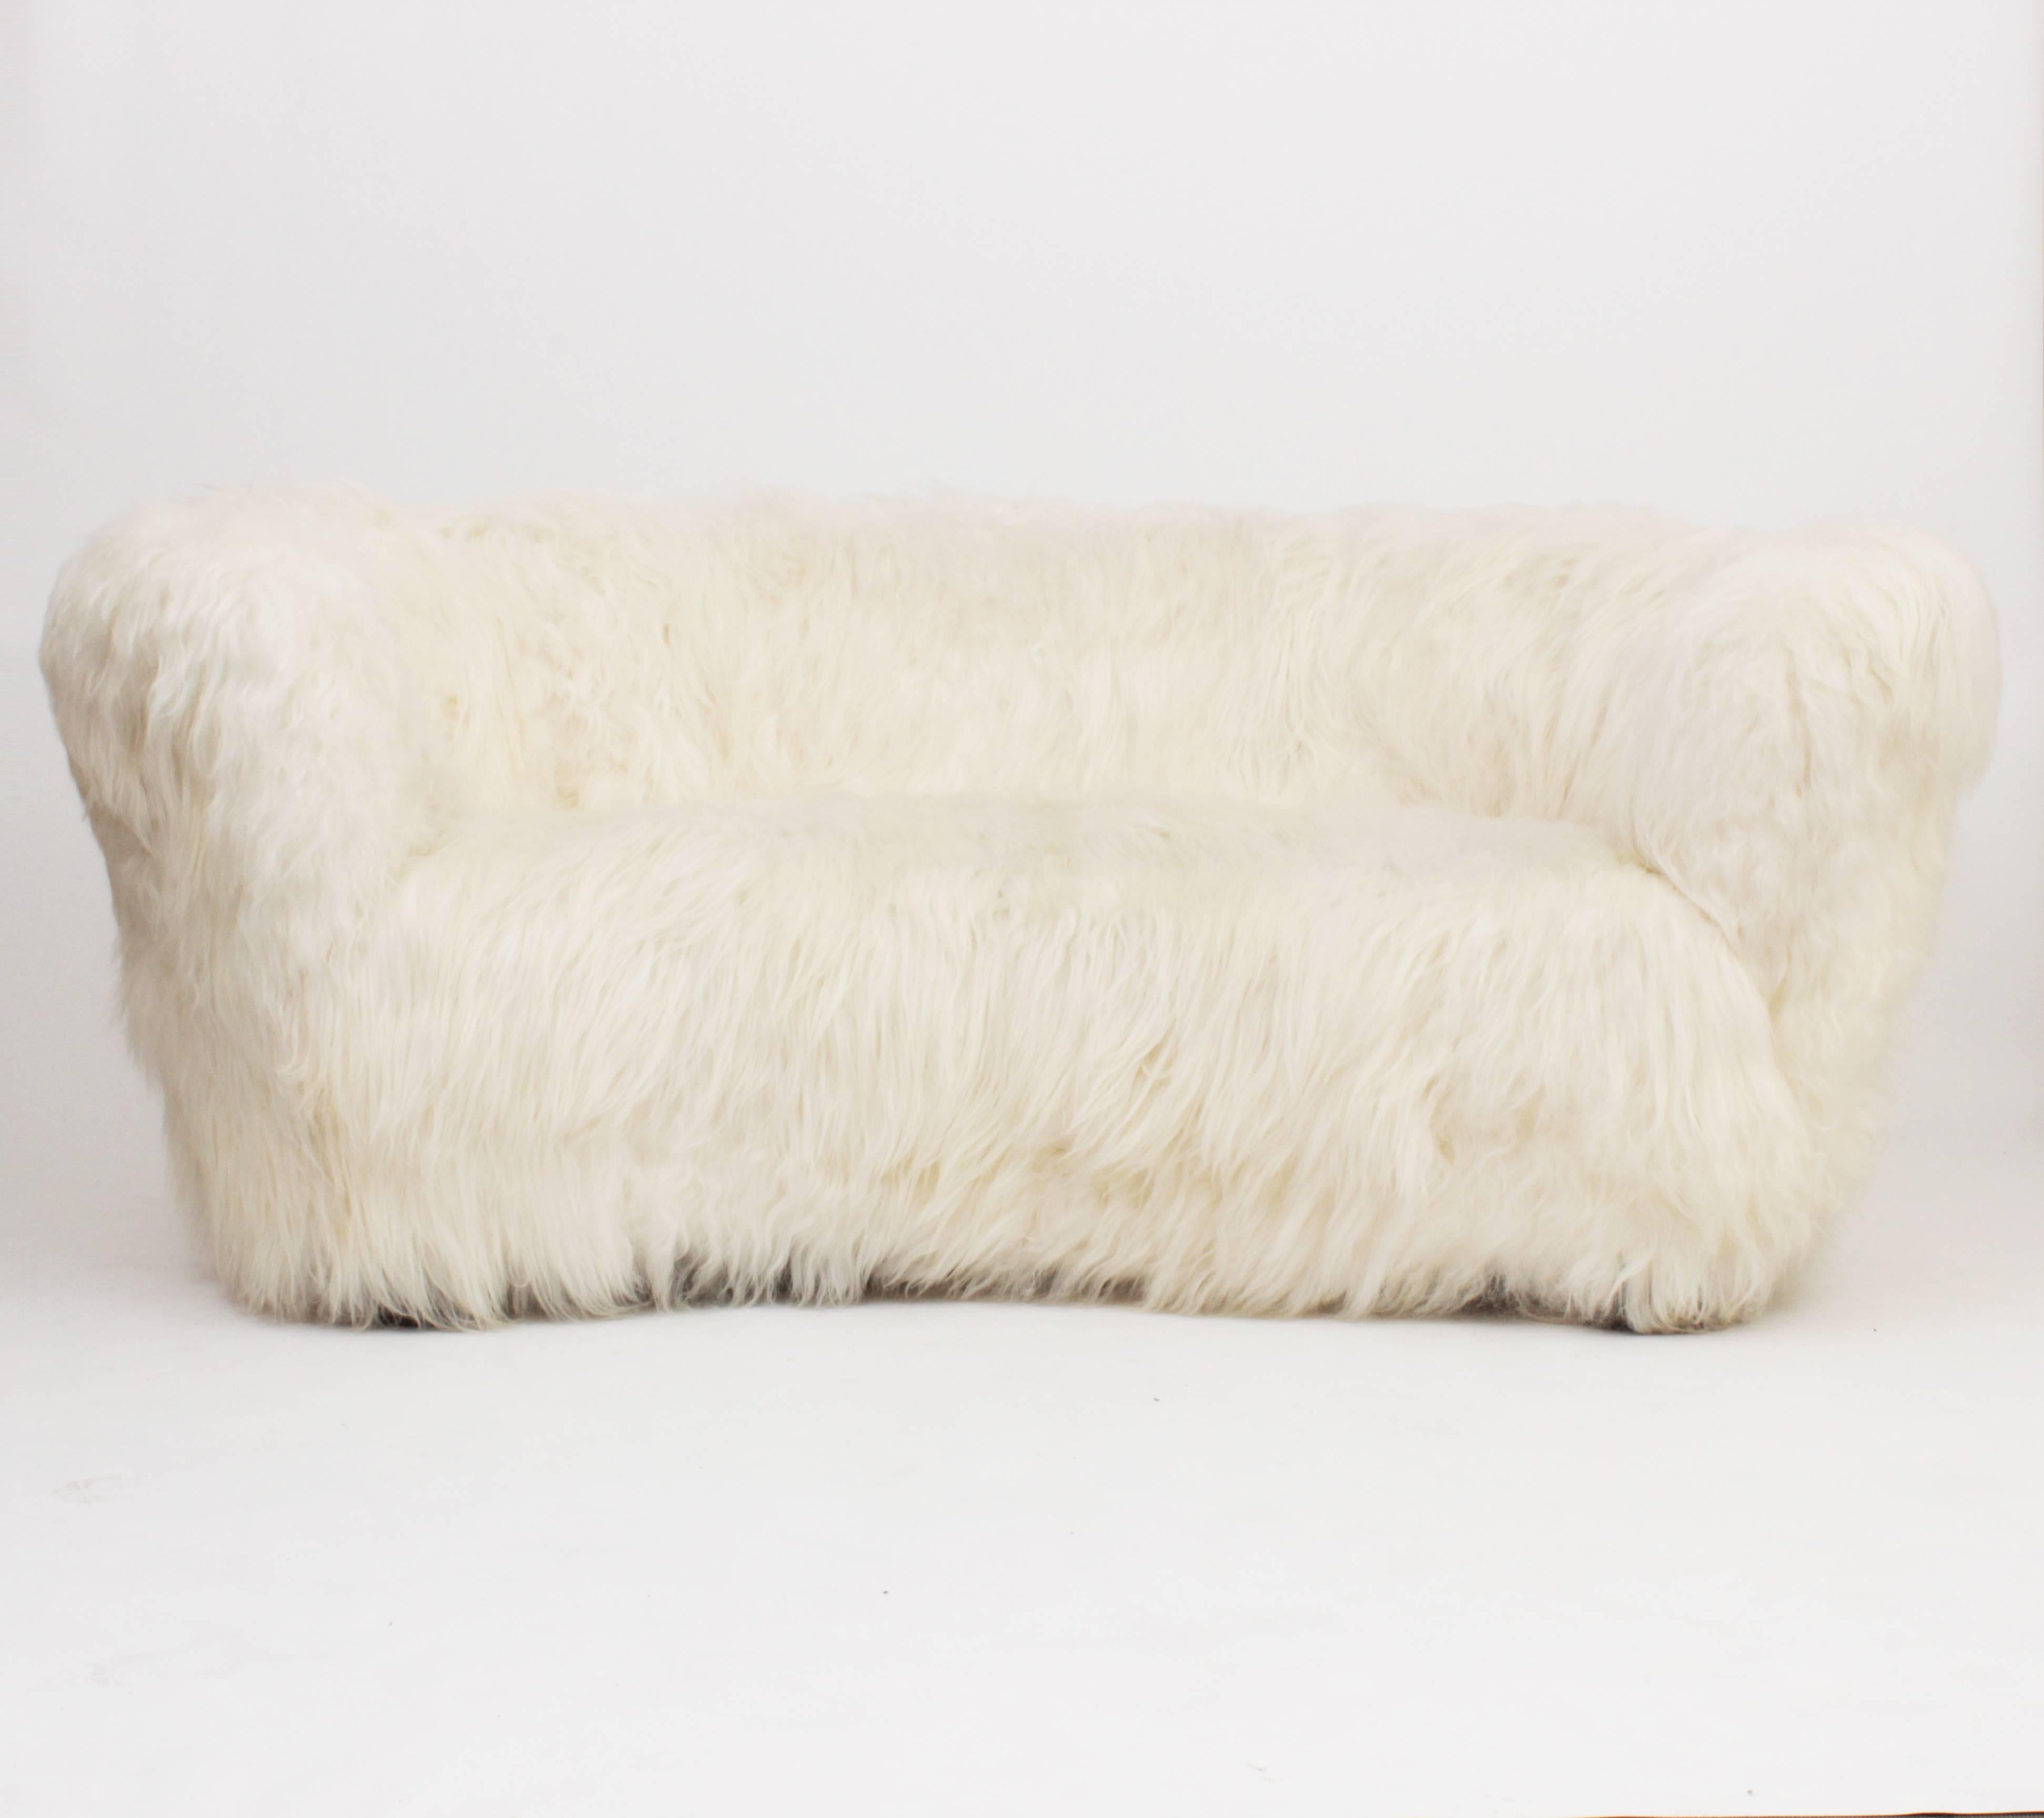 Three-seat curved sofa by Slagelse Mobelvaerk. newly upholstered in natural white Icelandic sheepskin, Denmark, circa 1940.
Wooden structure and feet.